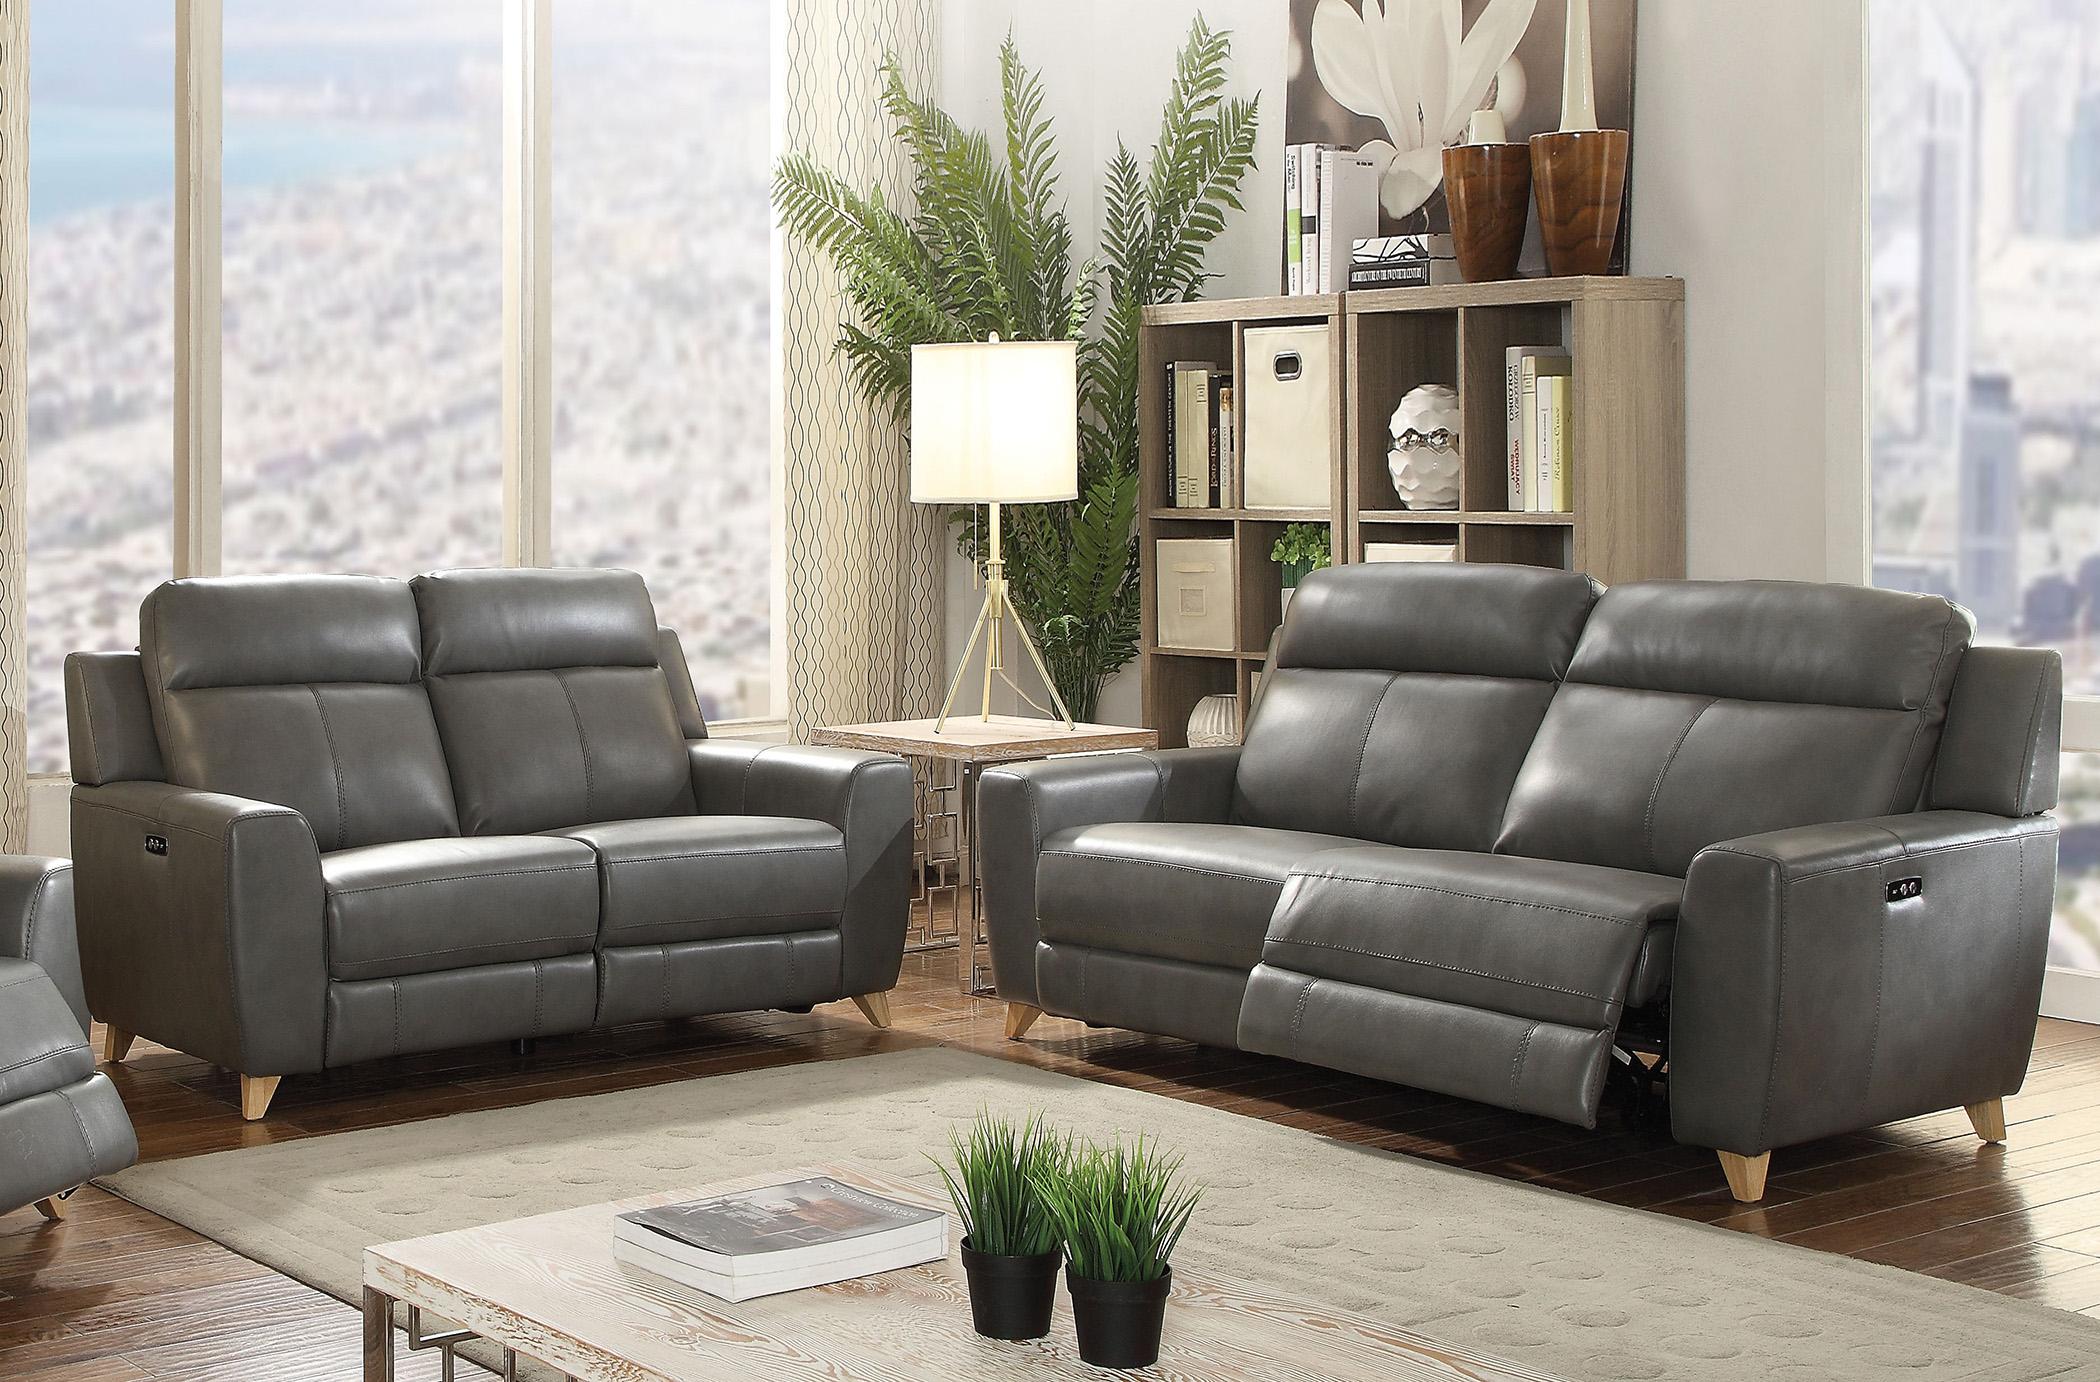 Contemporary, Casual Reclining Set Cayden-54200 Cayden-54200-Set-2 in Gray Faux Leather